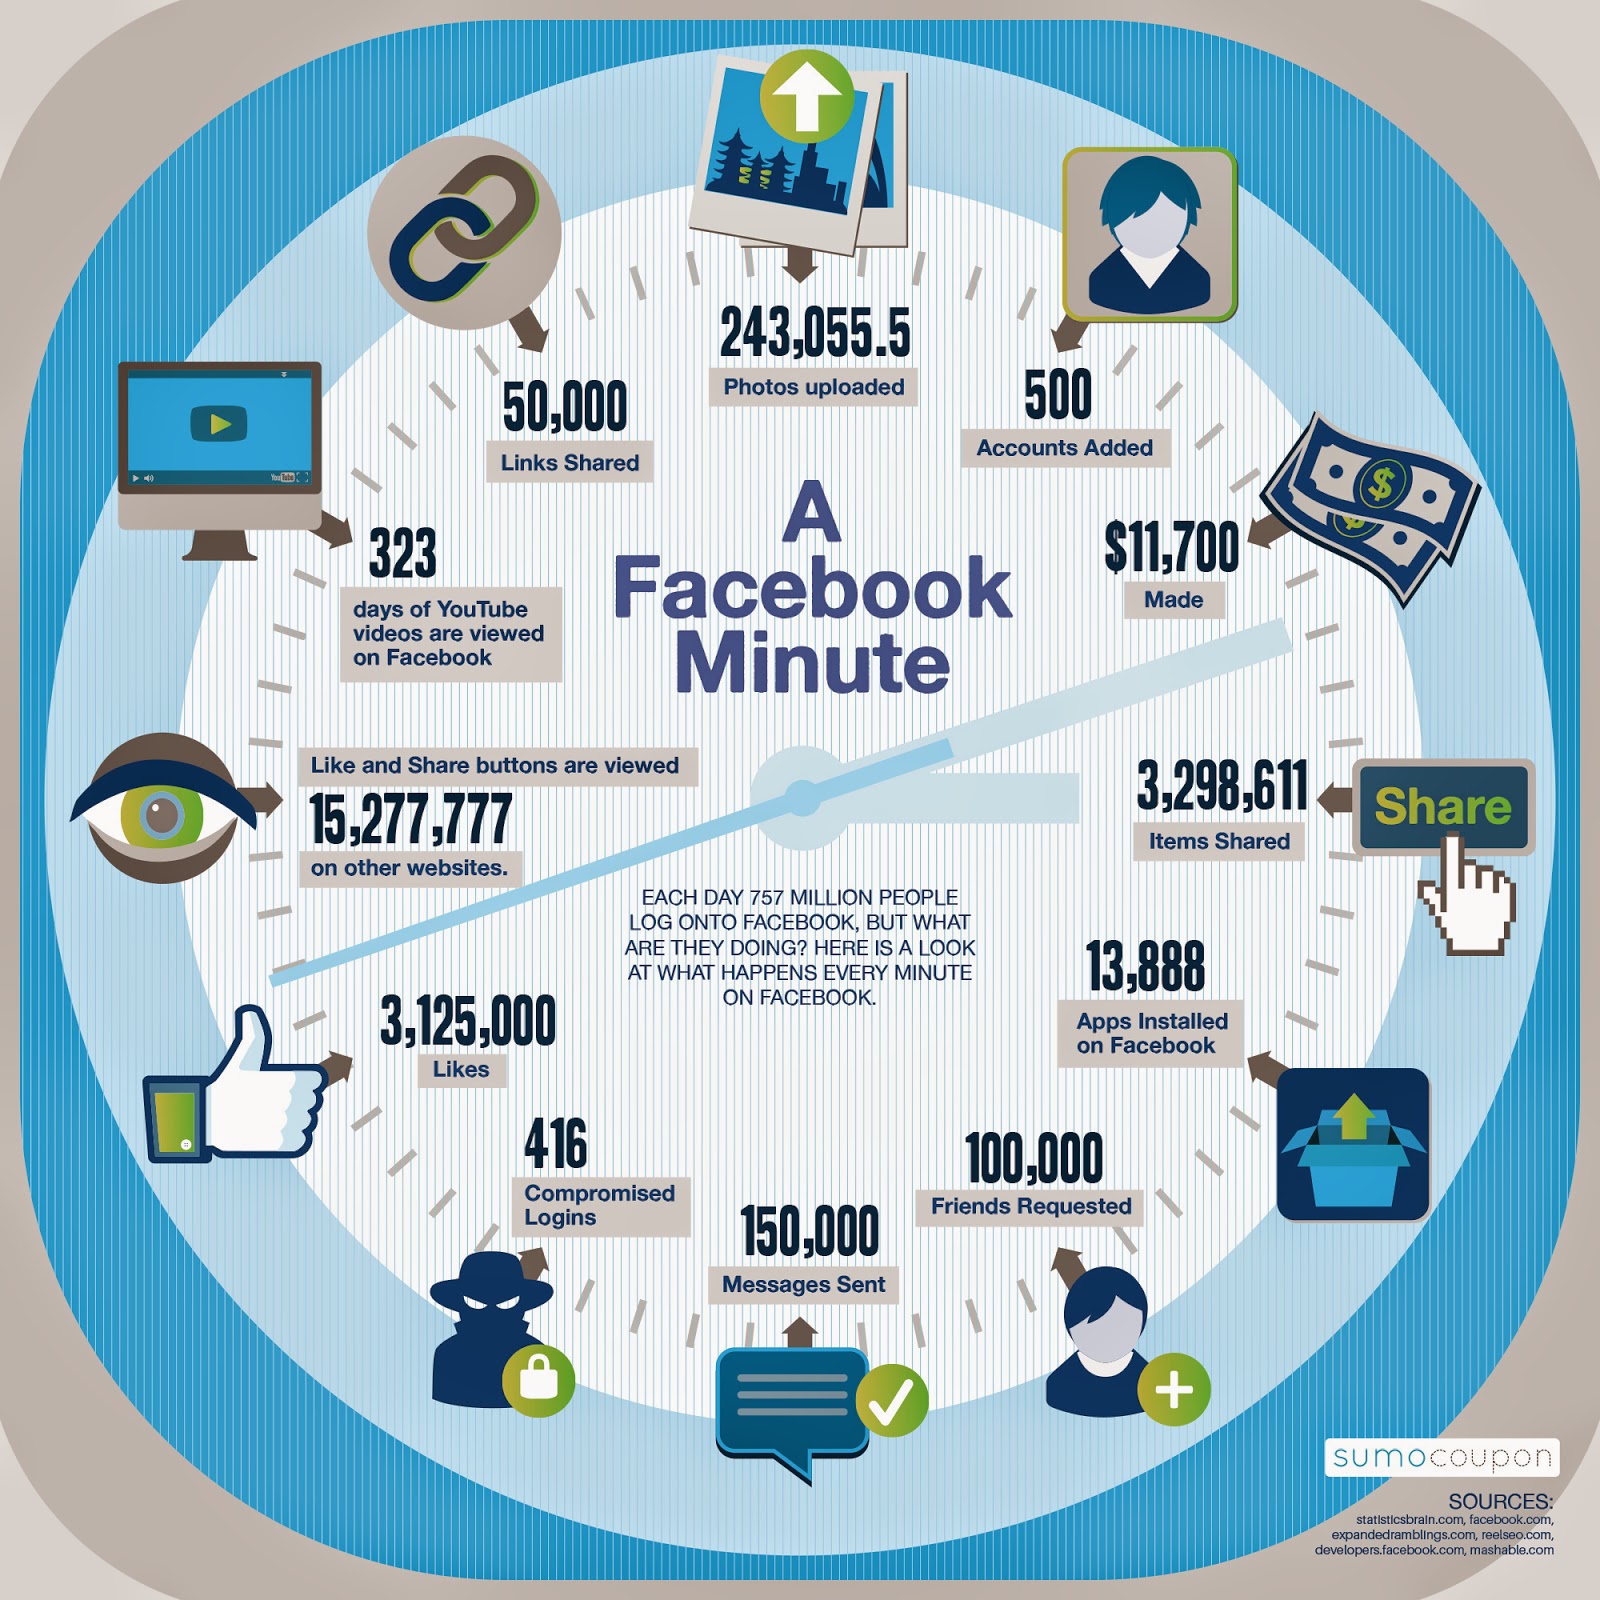 3. A minute on Facebook by Sumocoupon: